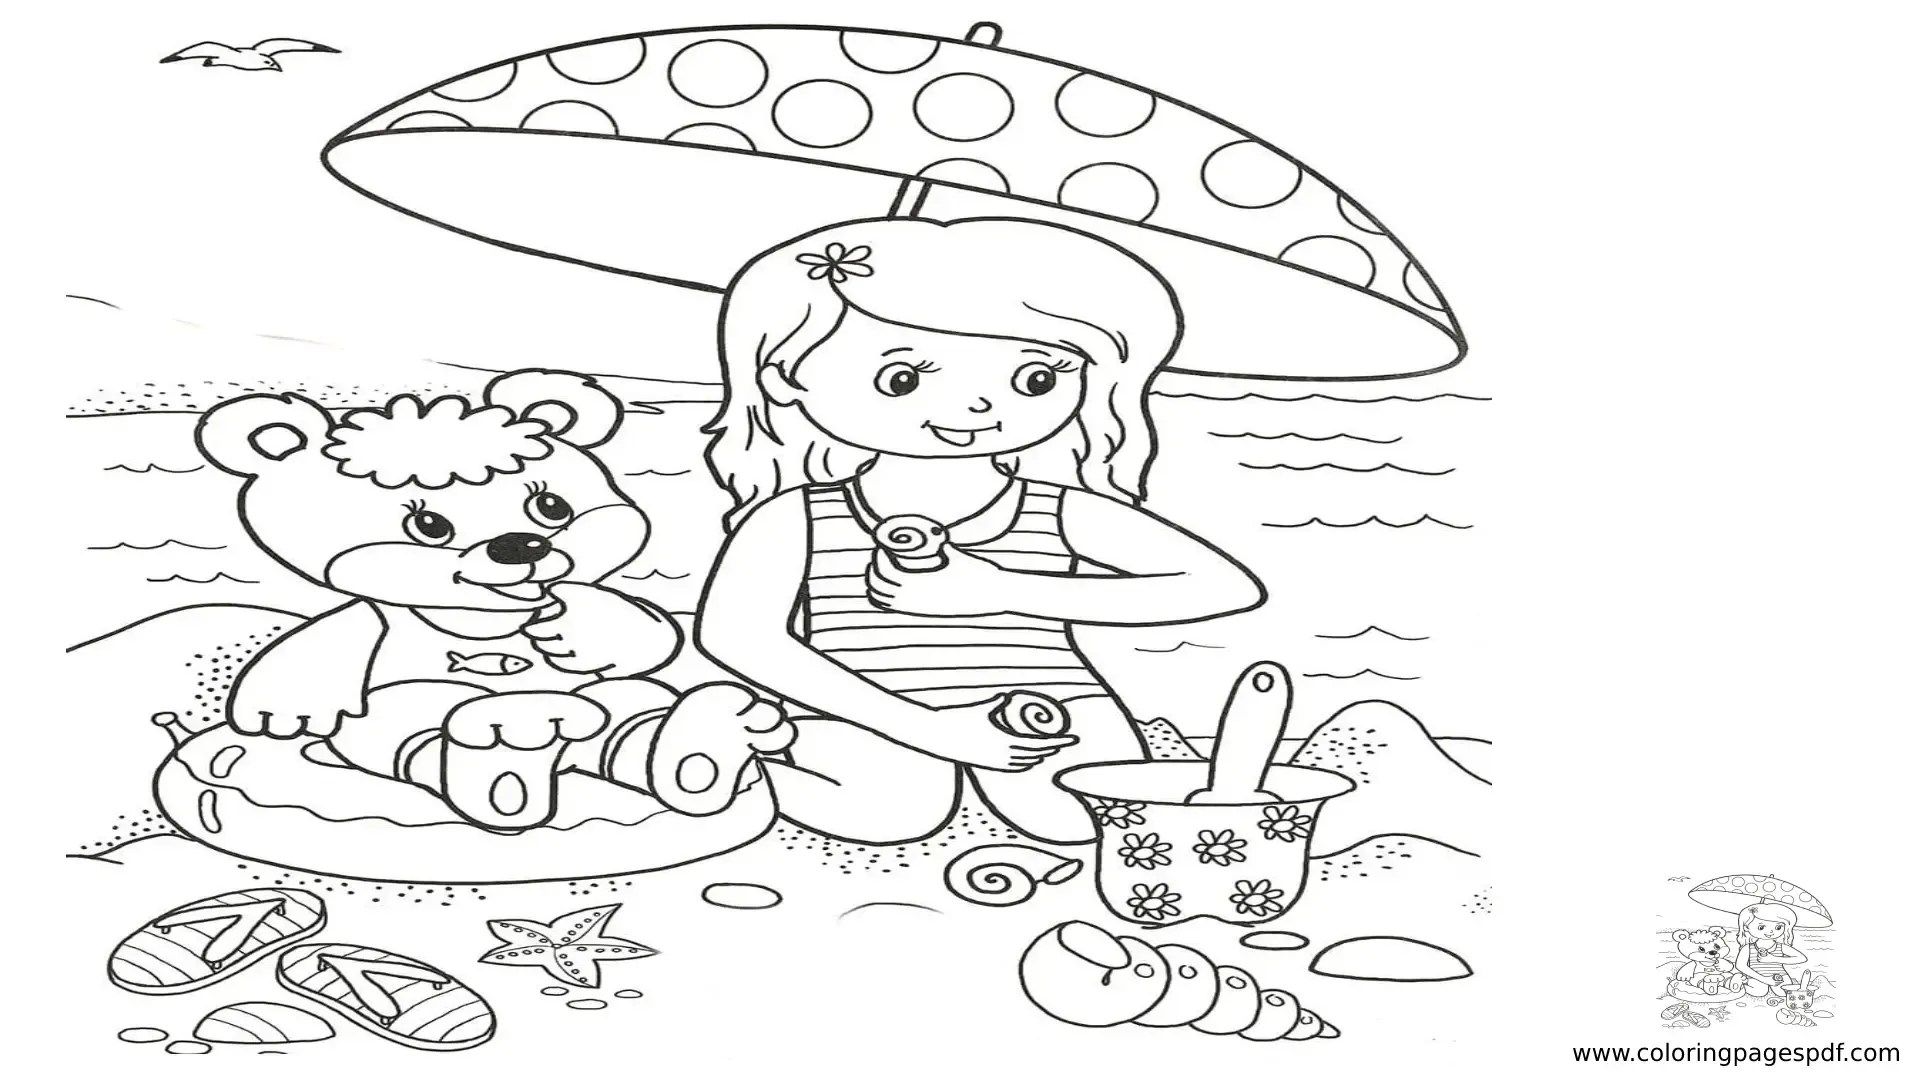 Coloring Pages Of A Girl Playing With Sand